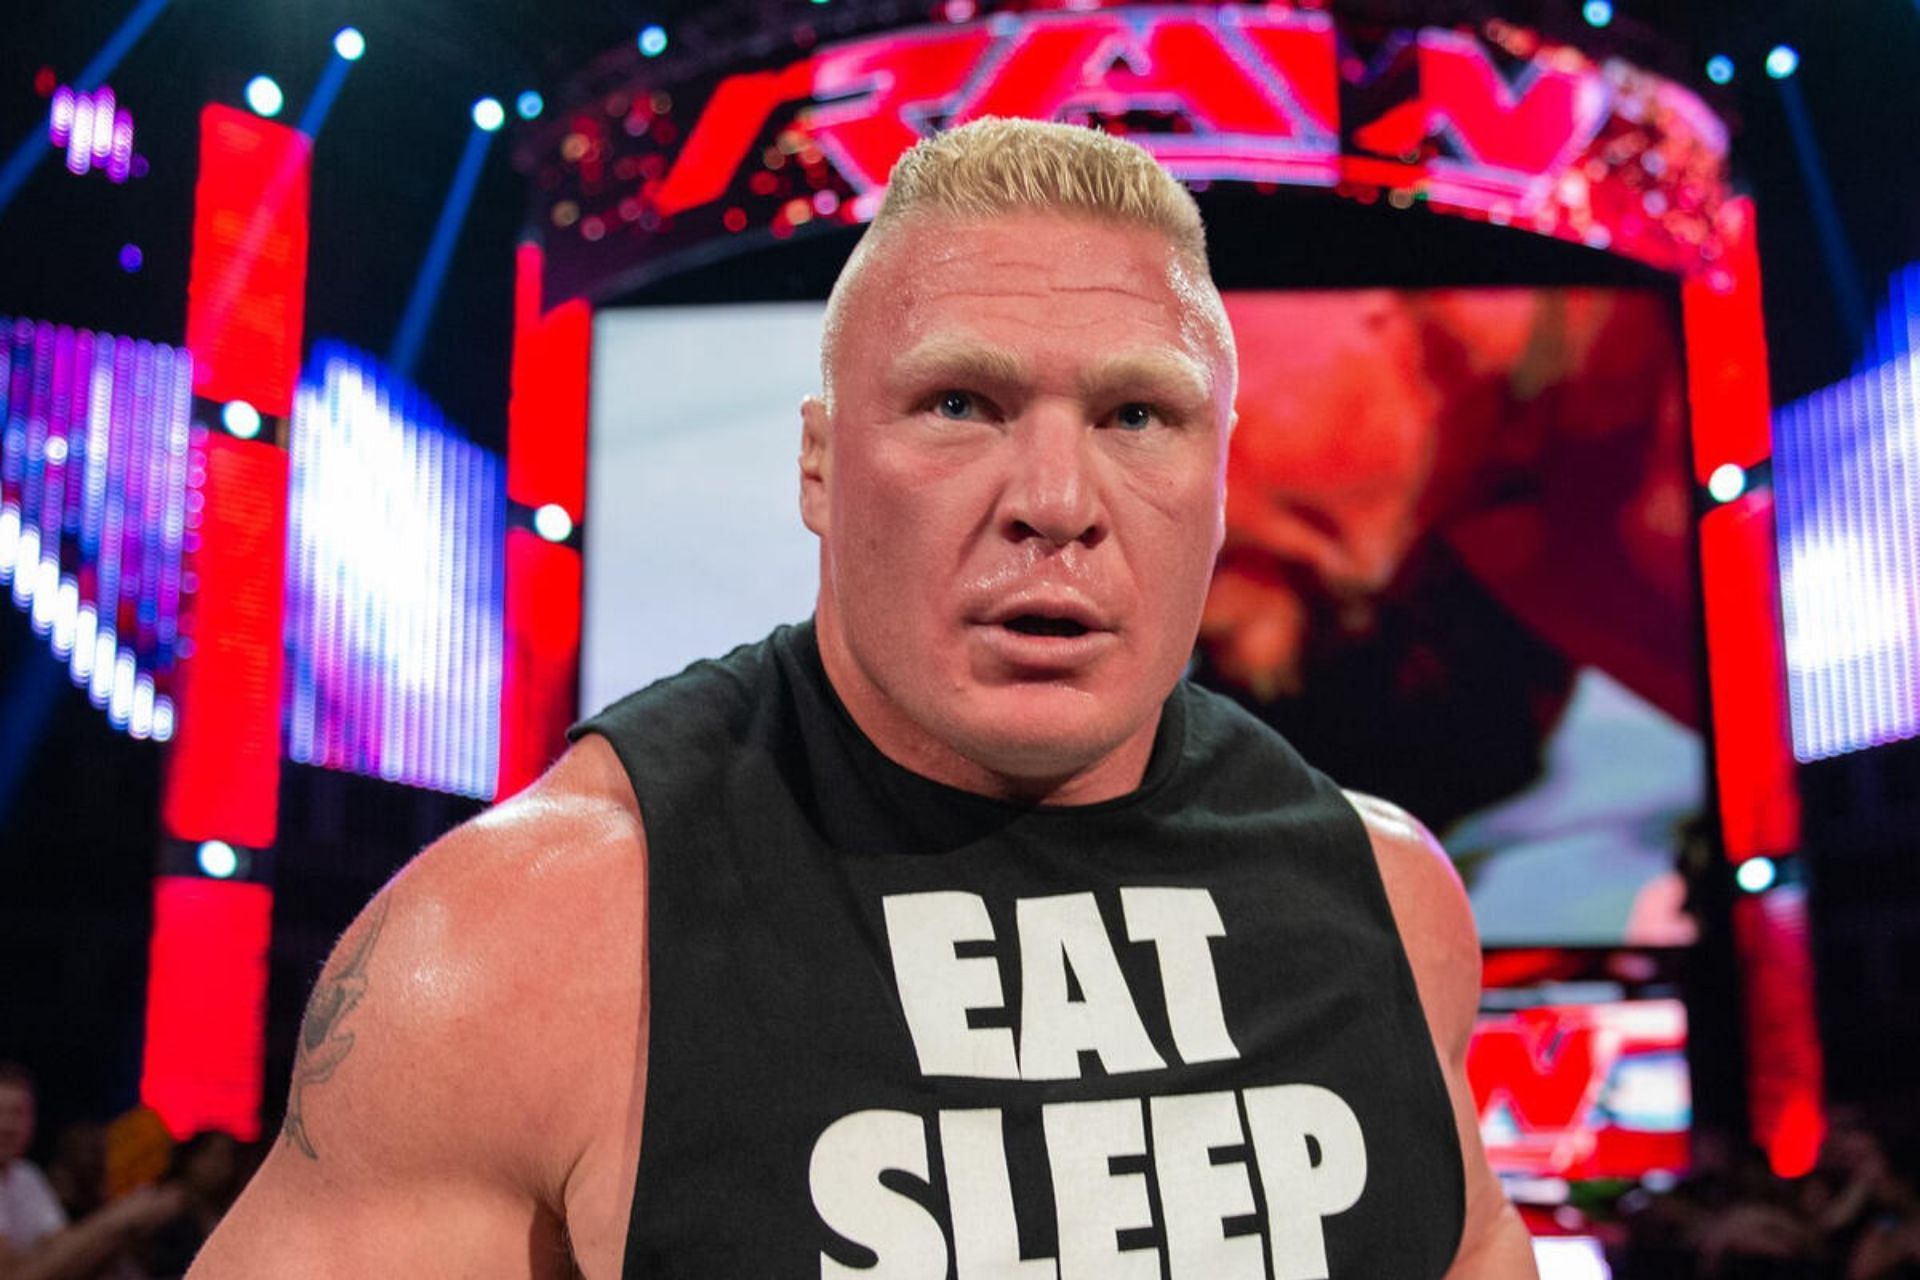 A WWE legend has a reaction to a clip showing his match with Brock Lesnar [Image Credits: WWE Images]